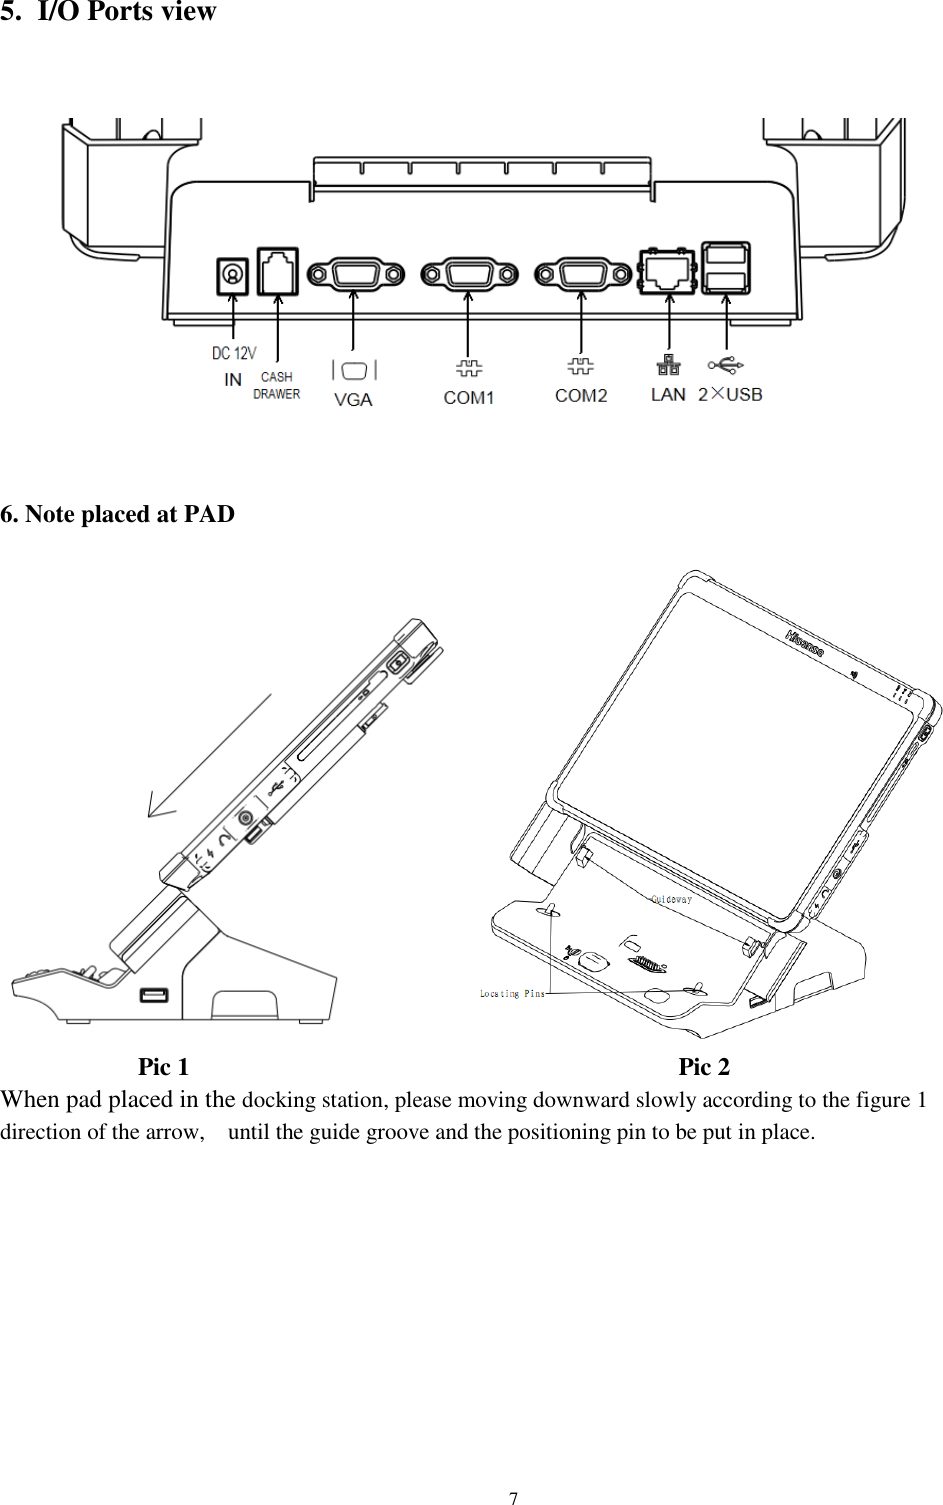                                                               7  5. I/O Ports view      6. Note placed at PAD                 Pic 1                                       Pic 2 When pad placed in the docking station, please moving downward slowly according to the figure 1 direction of the arrow,    until the guide groove and the positioning pin to be put in place.       